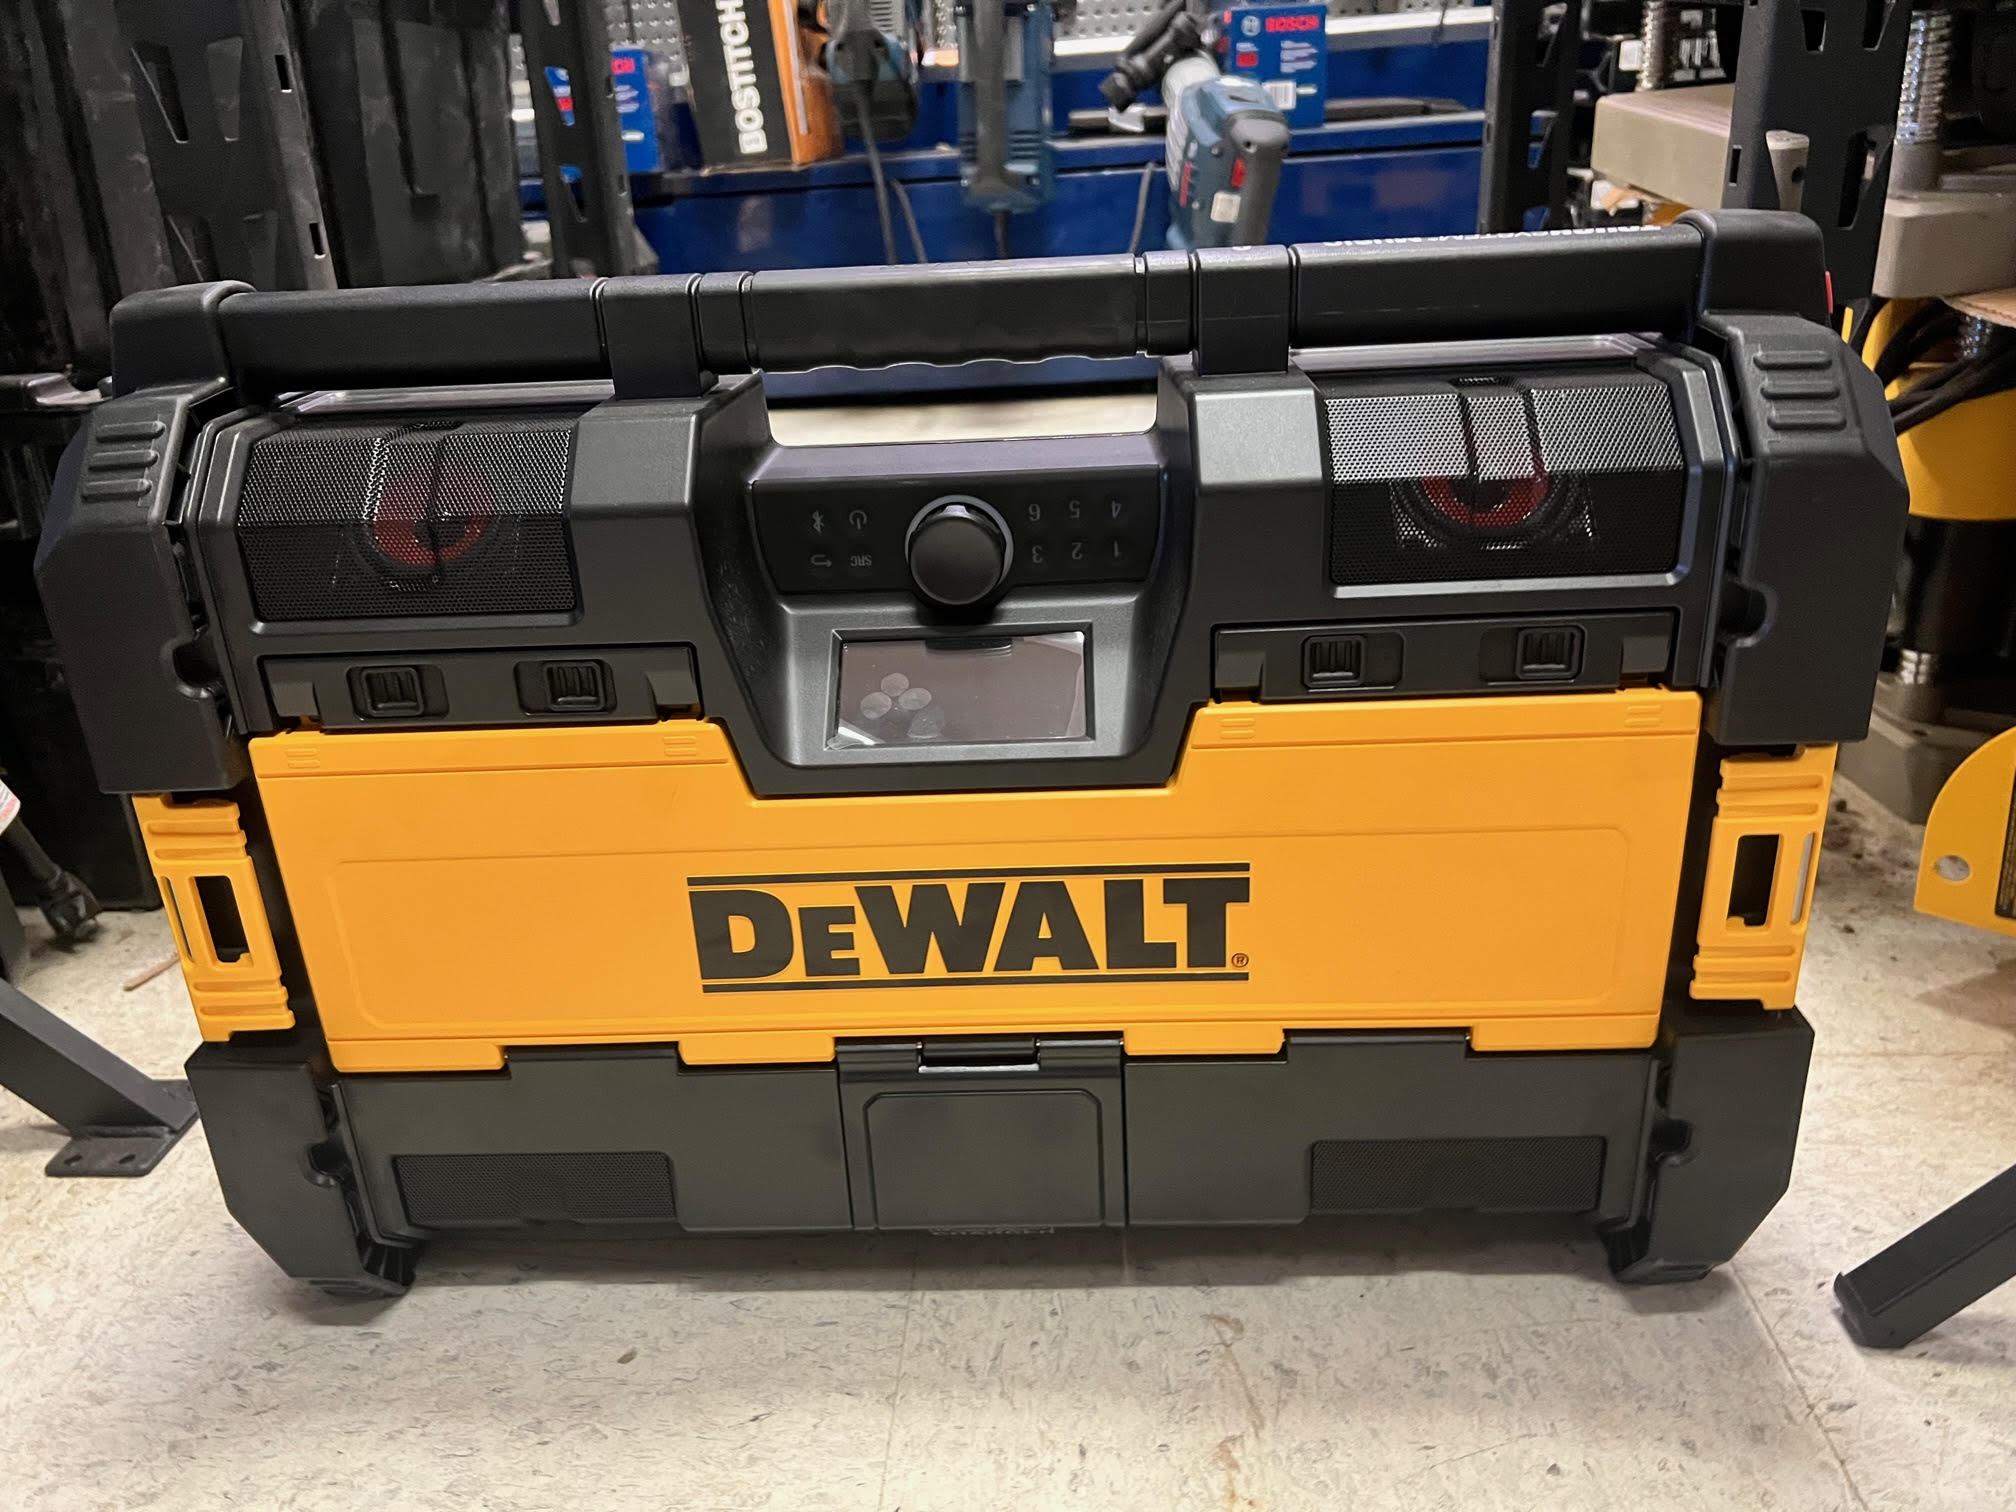 Dewalt DWST08810 ToughSystem Music and Charger System